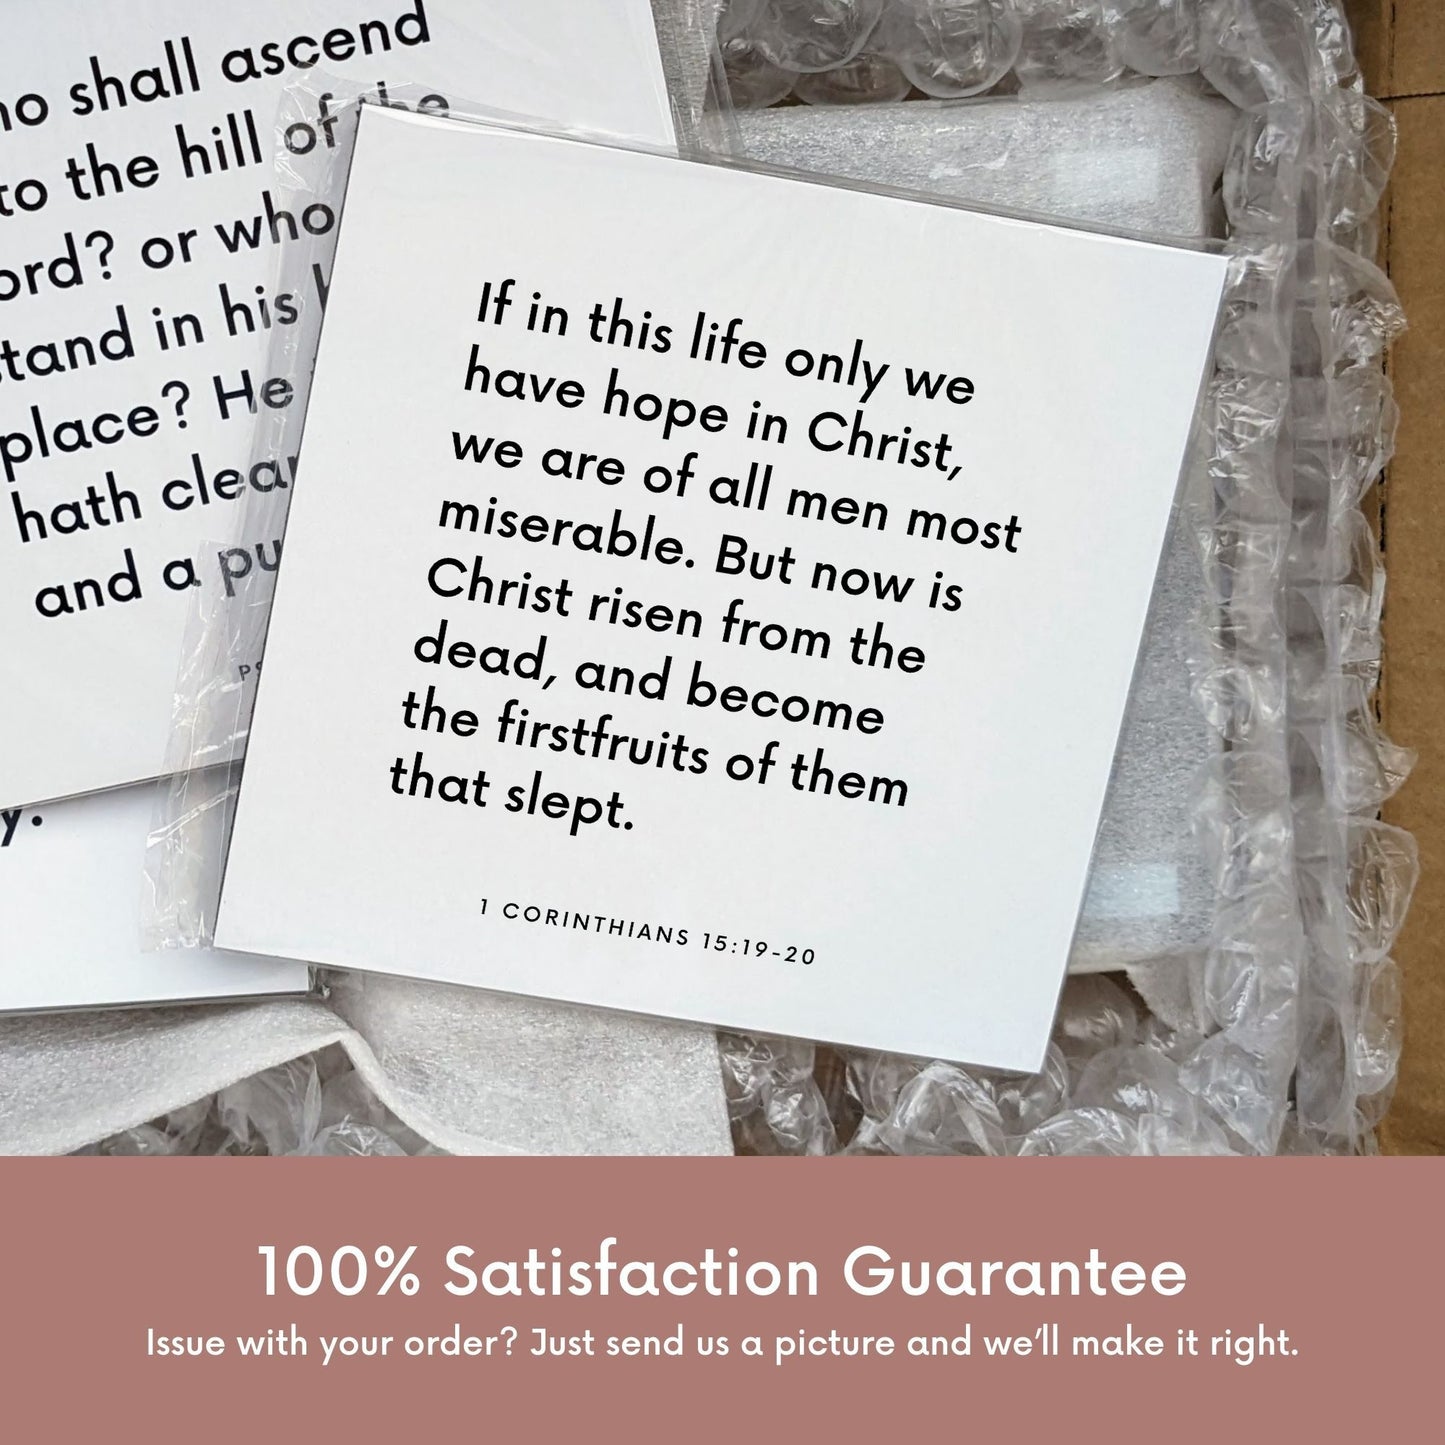 Shipping materials for scripture tile of 1 Corinthians 15:19-20 - "Now is Christ risen from the dead"